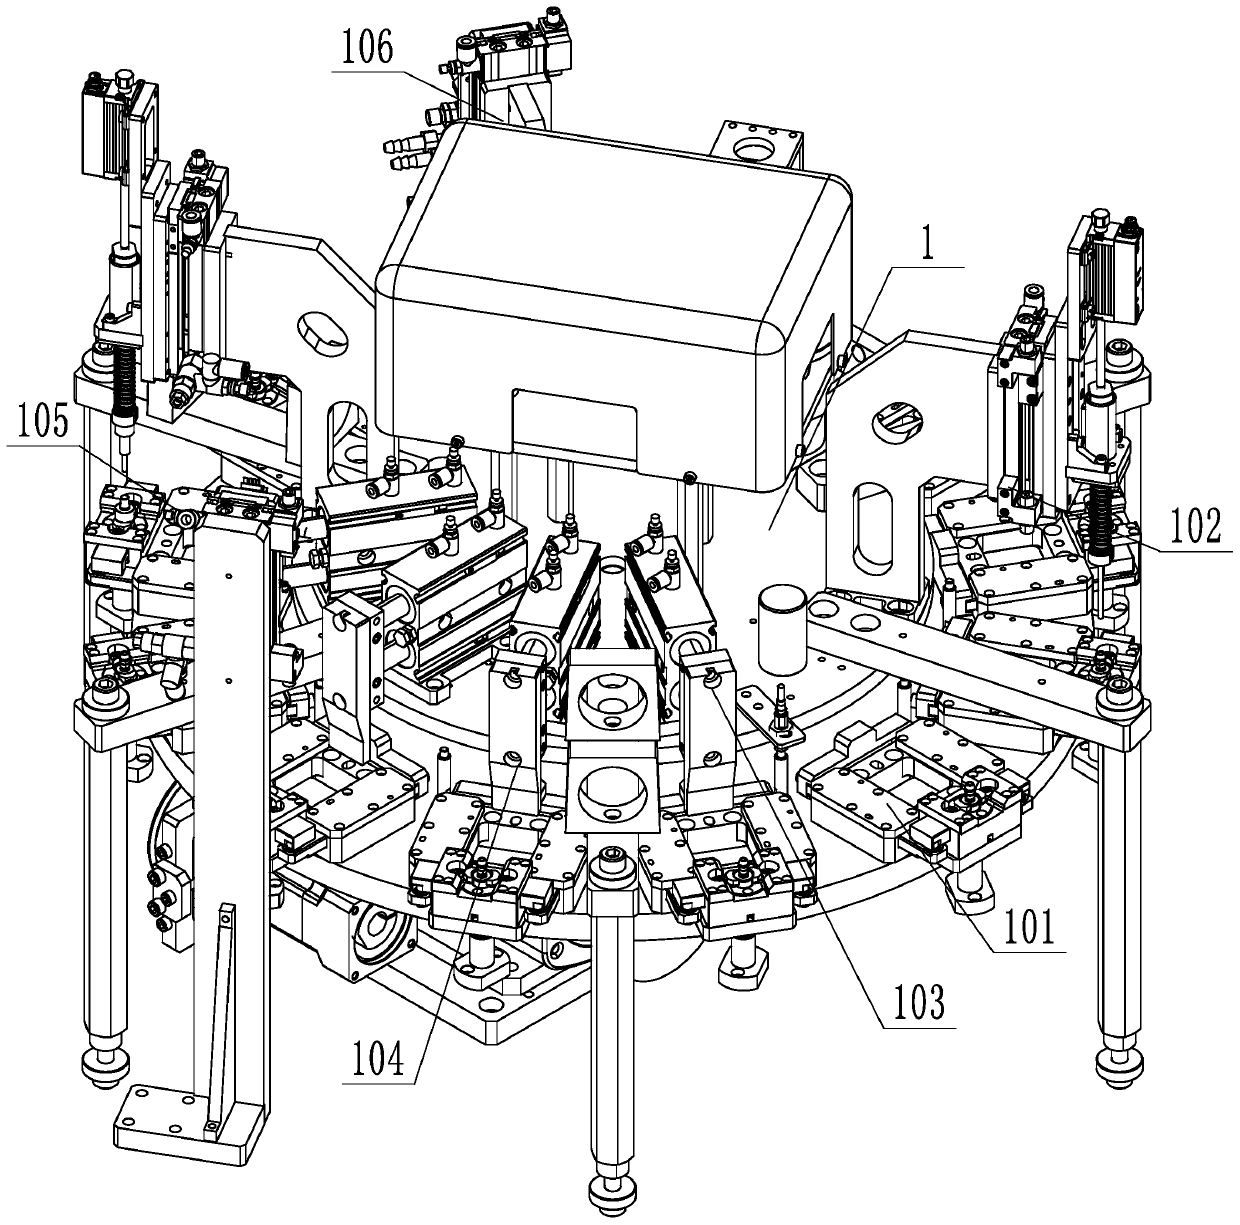 One-way valve assembling and detecting machine